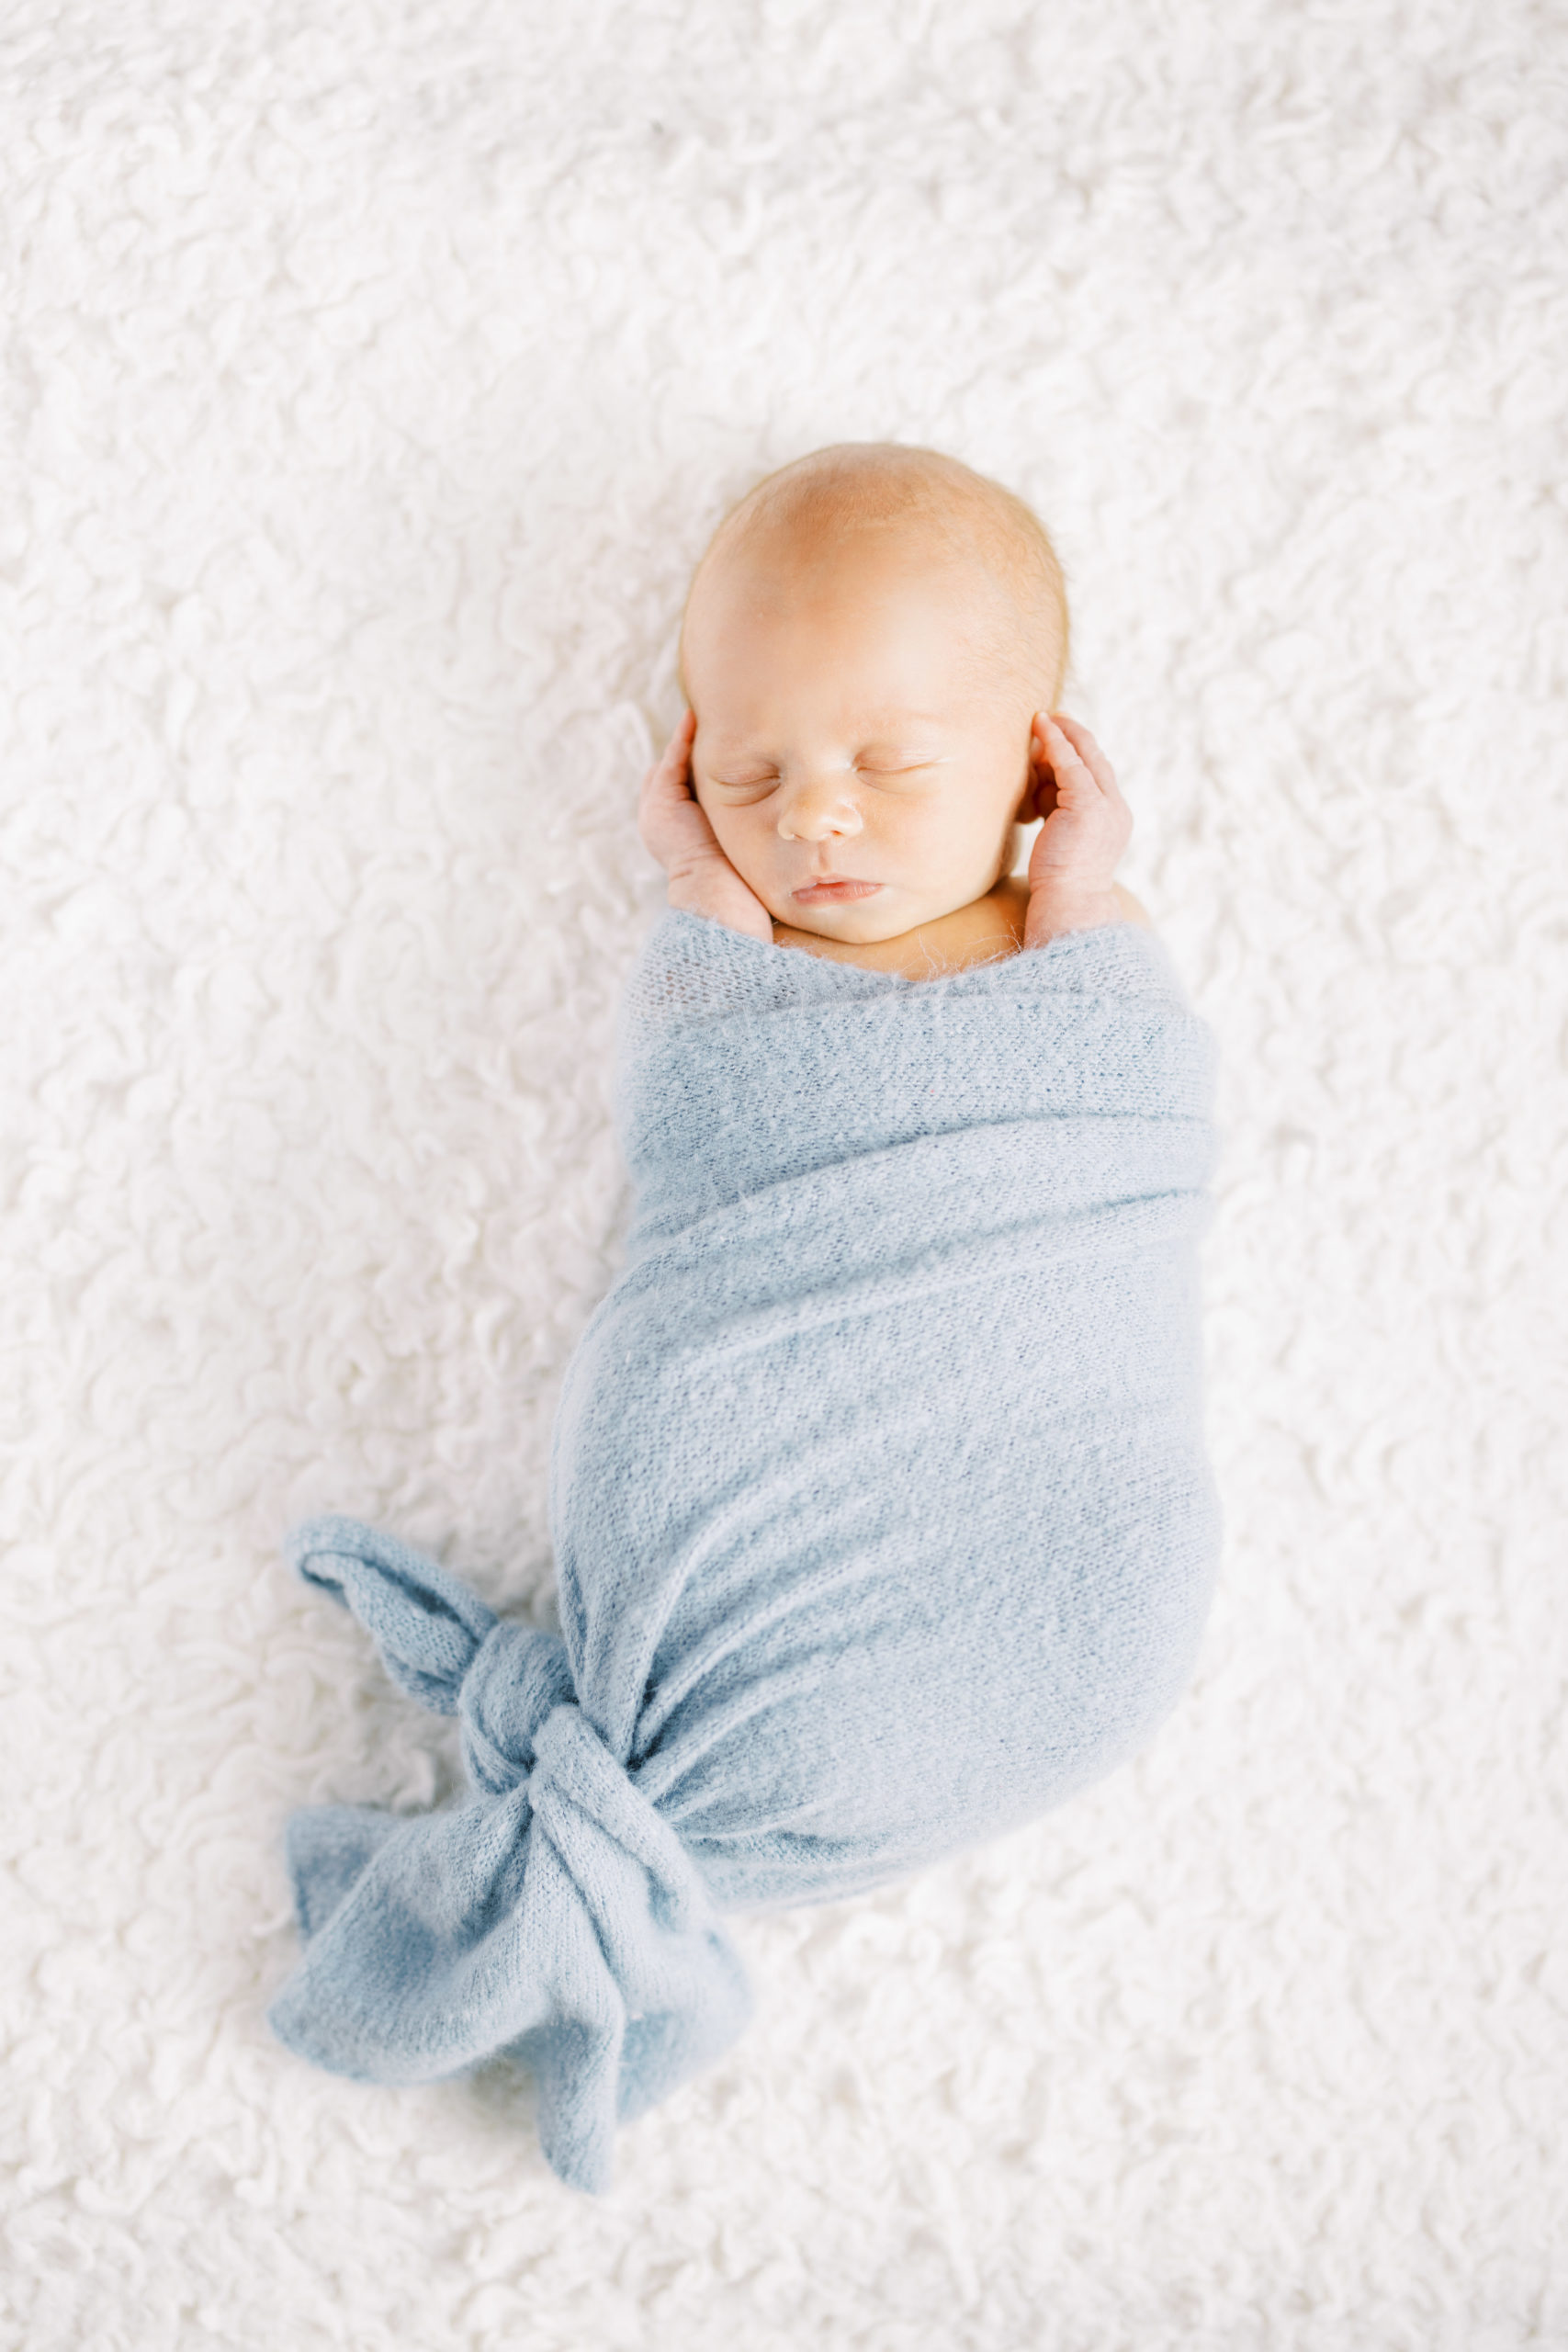 Cozy St Louis In Home Newborn Session